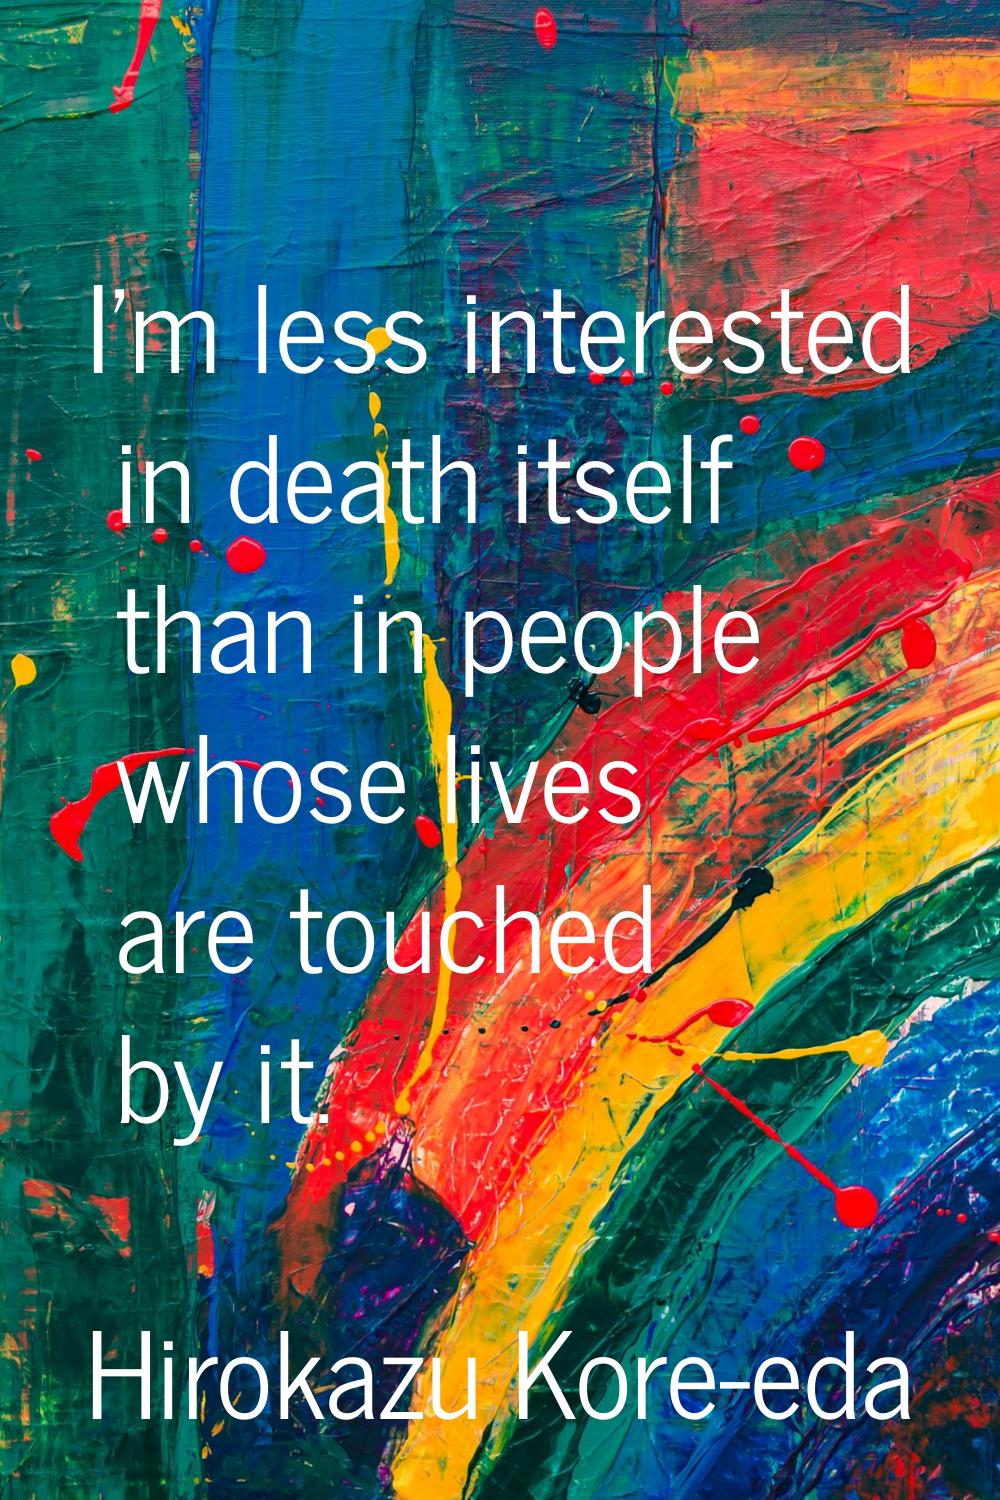 I'm less interested in death itself than in people whose lives are touched by it.